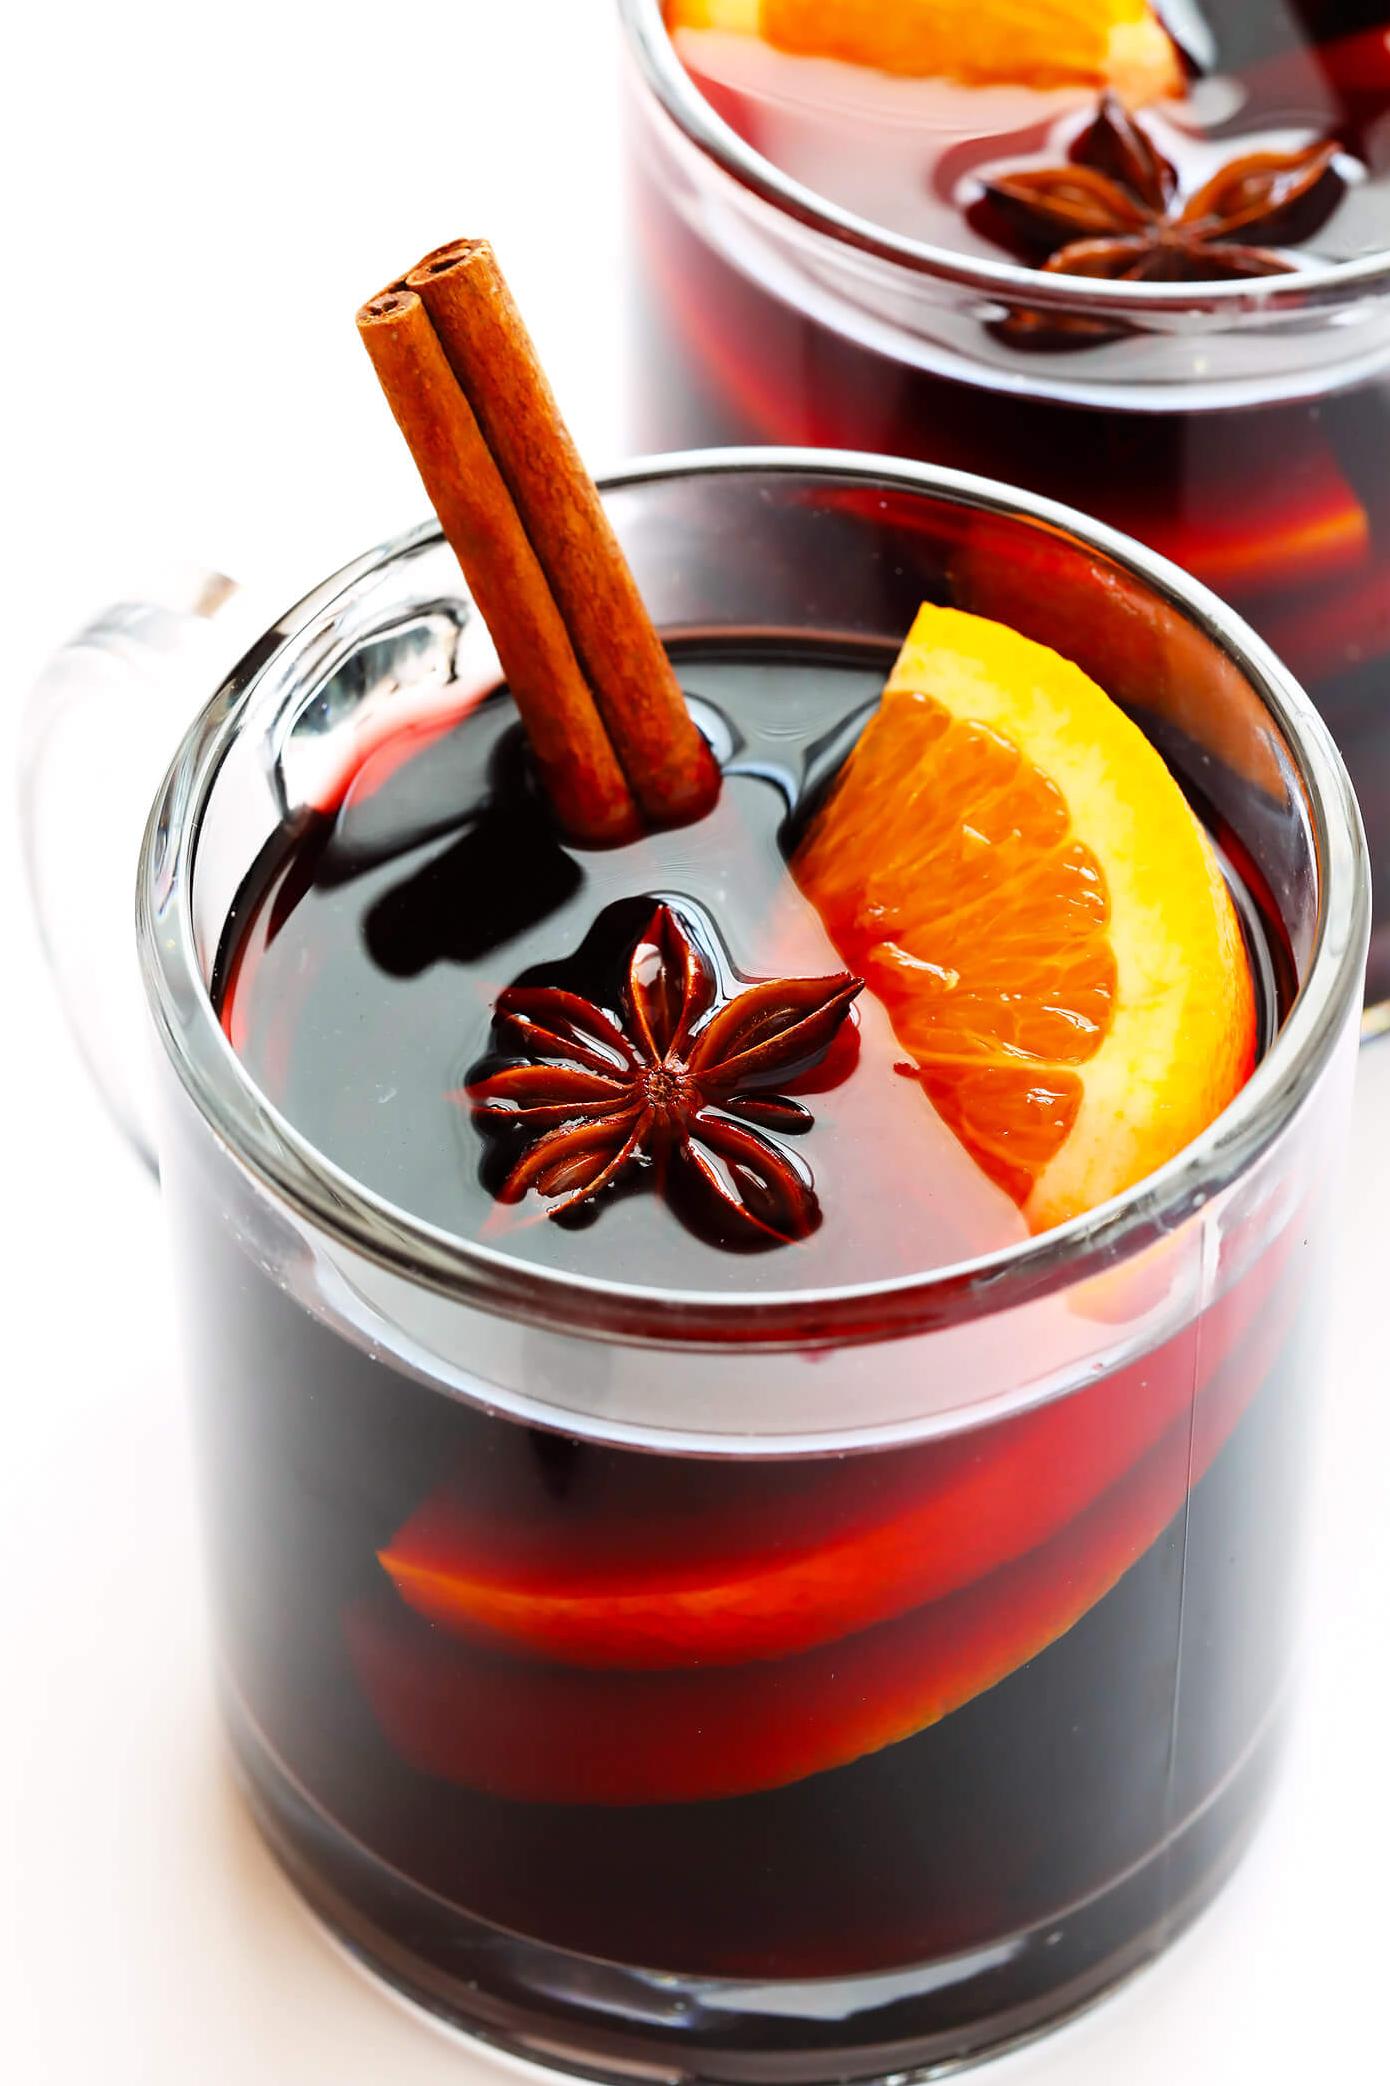 Hot Spiced Wine